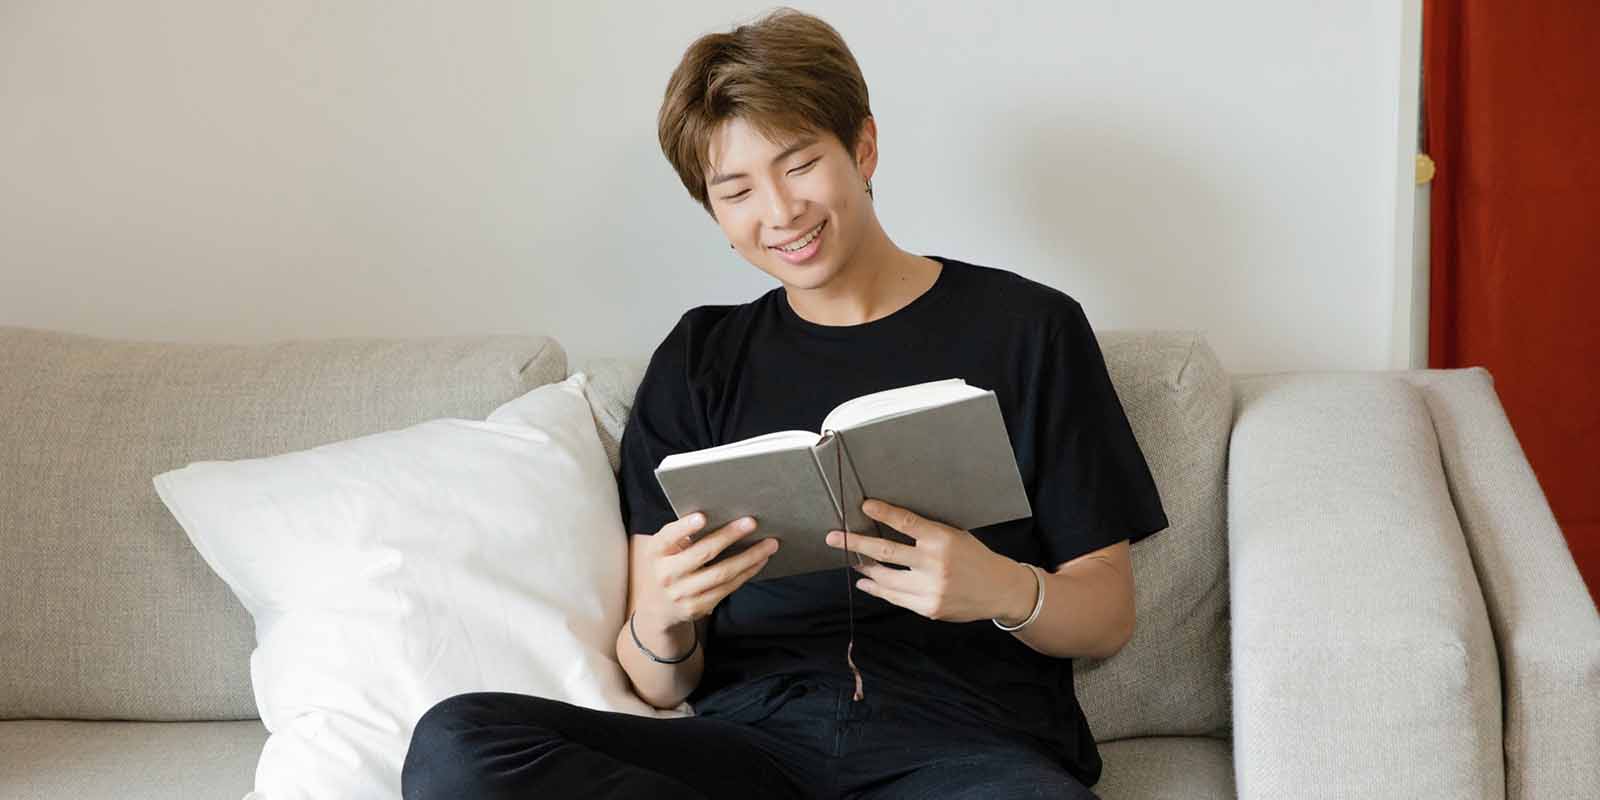 Get to know BTS's charismatic leader and main rapper RM better by learning 10 new things about him.